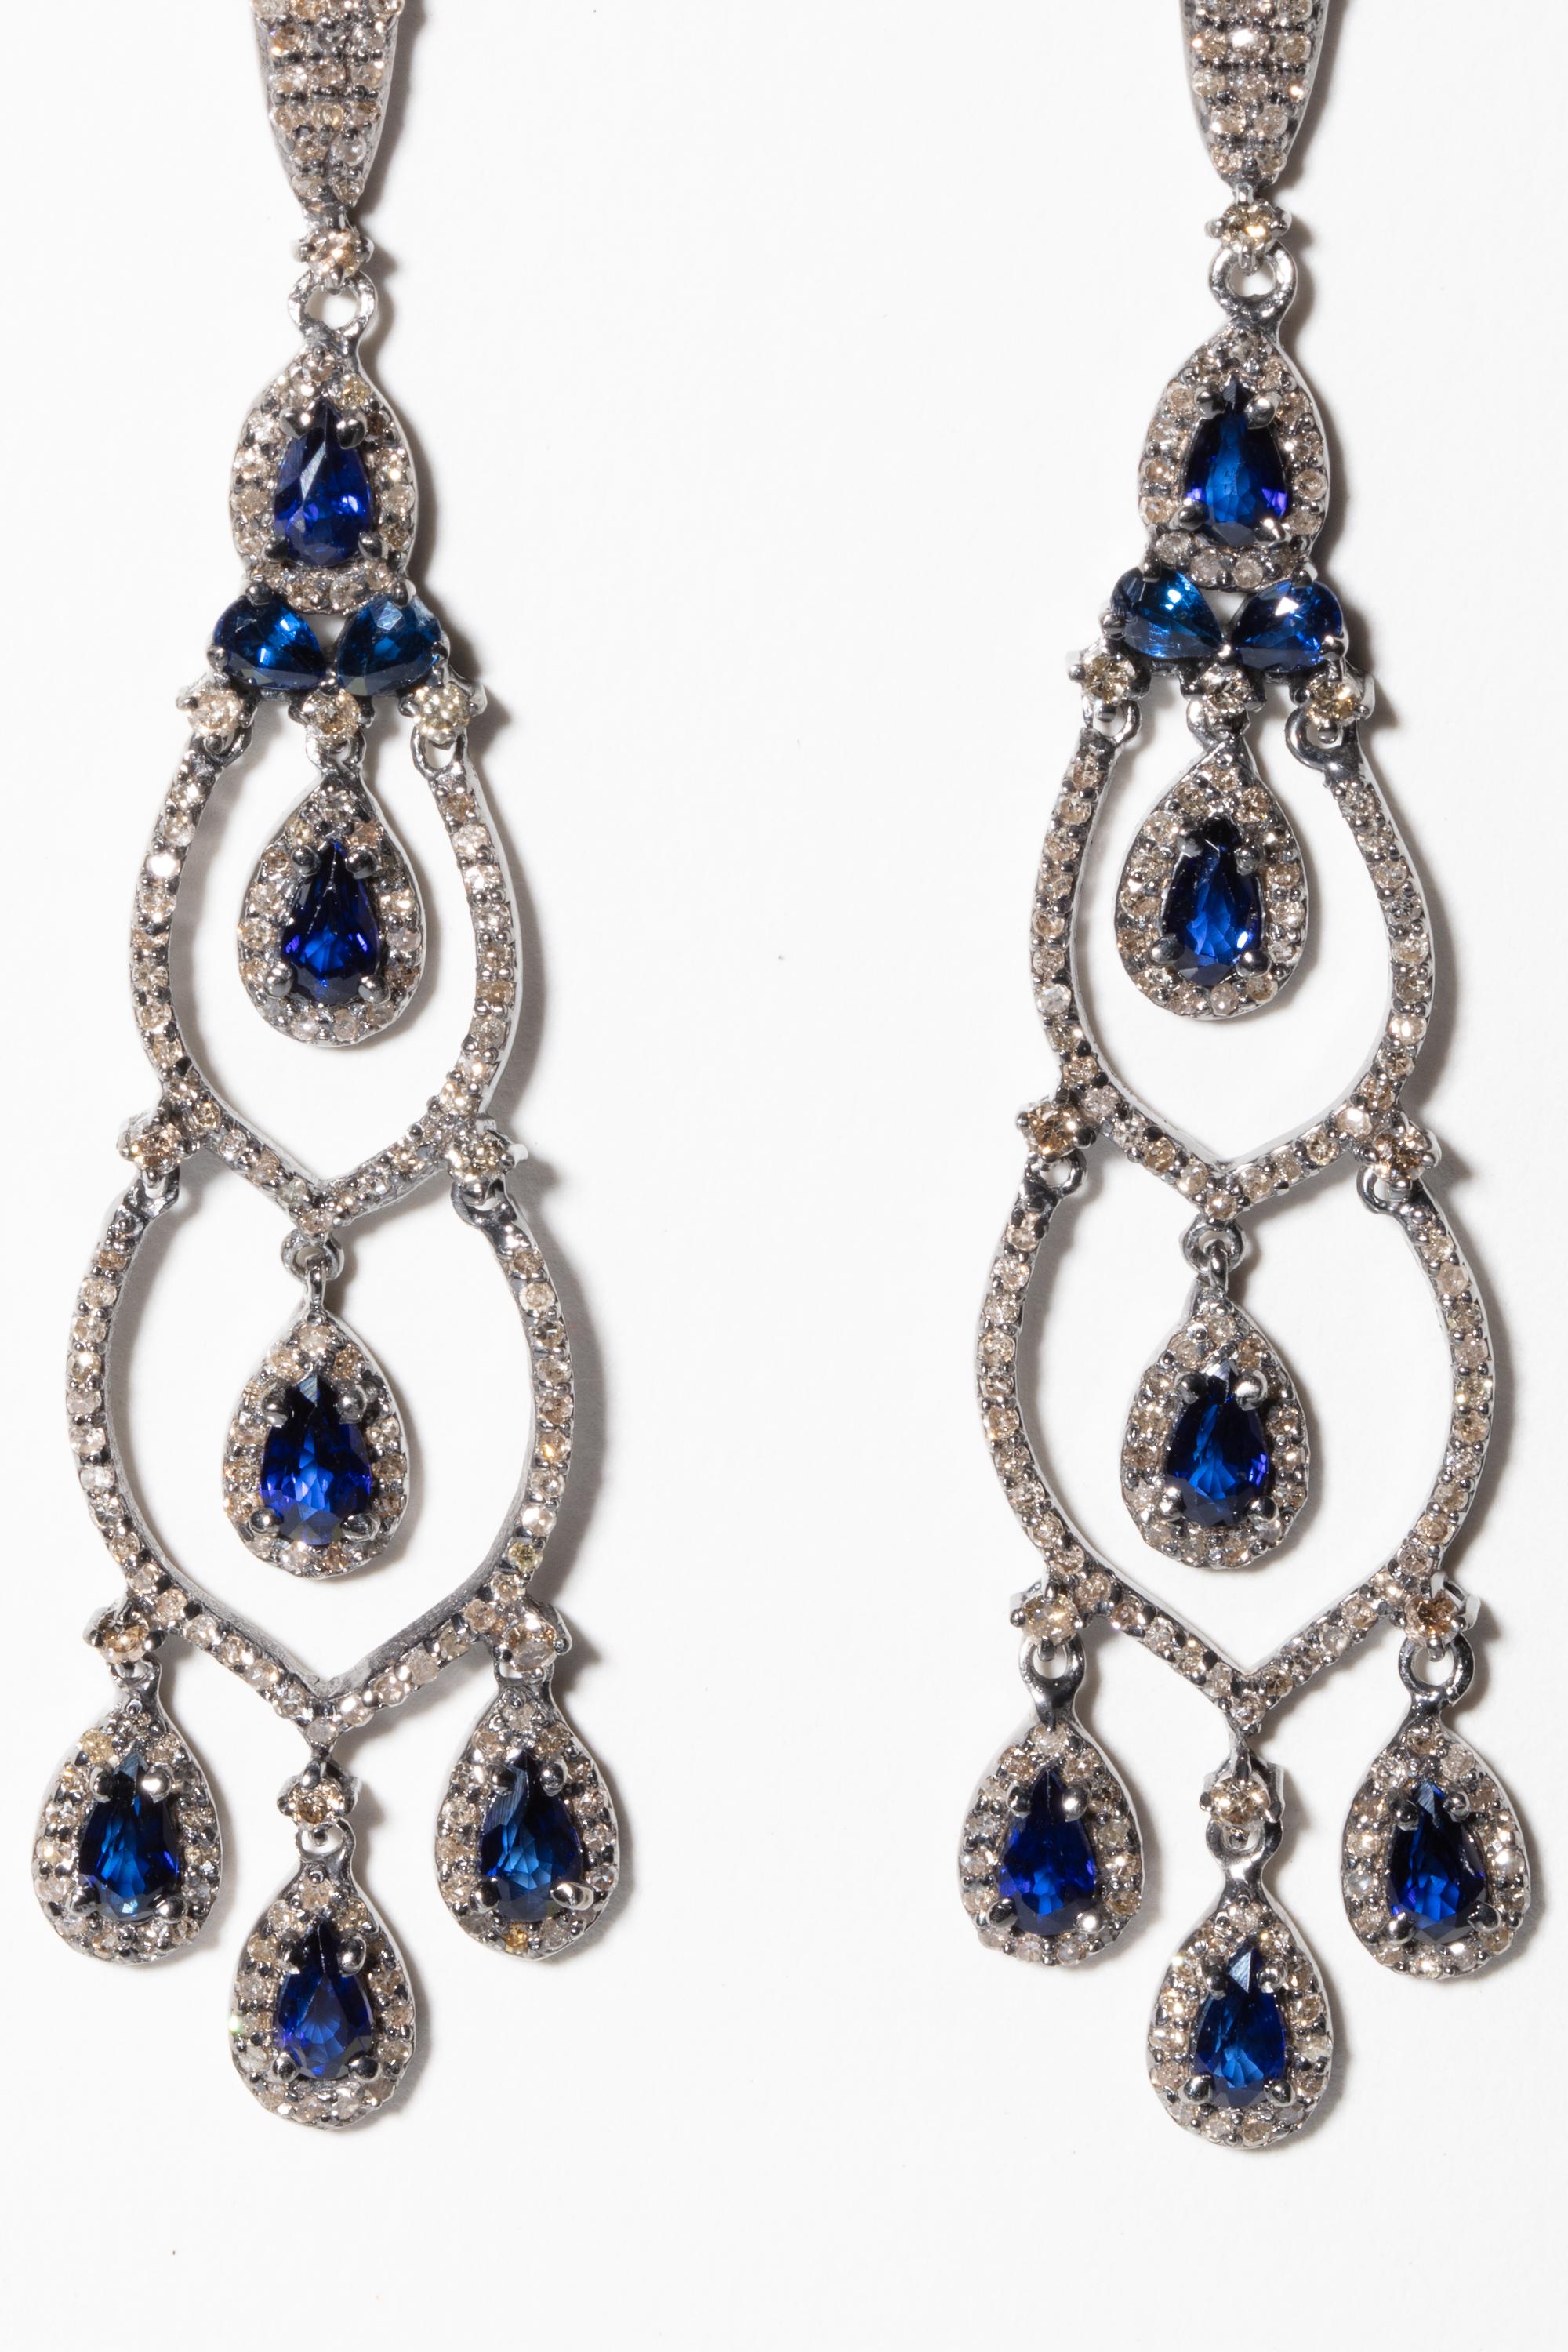 Pair of pear-shaped, faceted blue sapphire chandelier earrings bordered in pave`-set diamonds and on earring post as well.  Set in sterling silver with an 18K gold post for pierced ears.  Carat weight of diamonds is 2.29, sapphires are 3.07 carats.